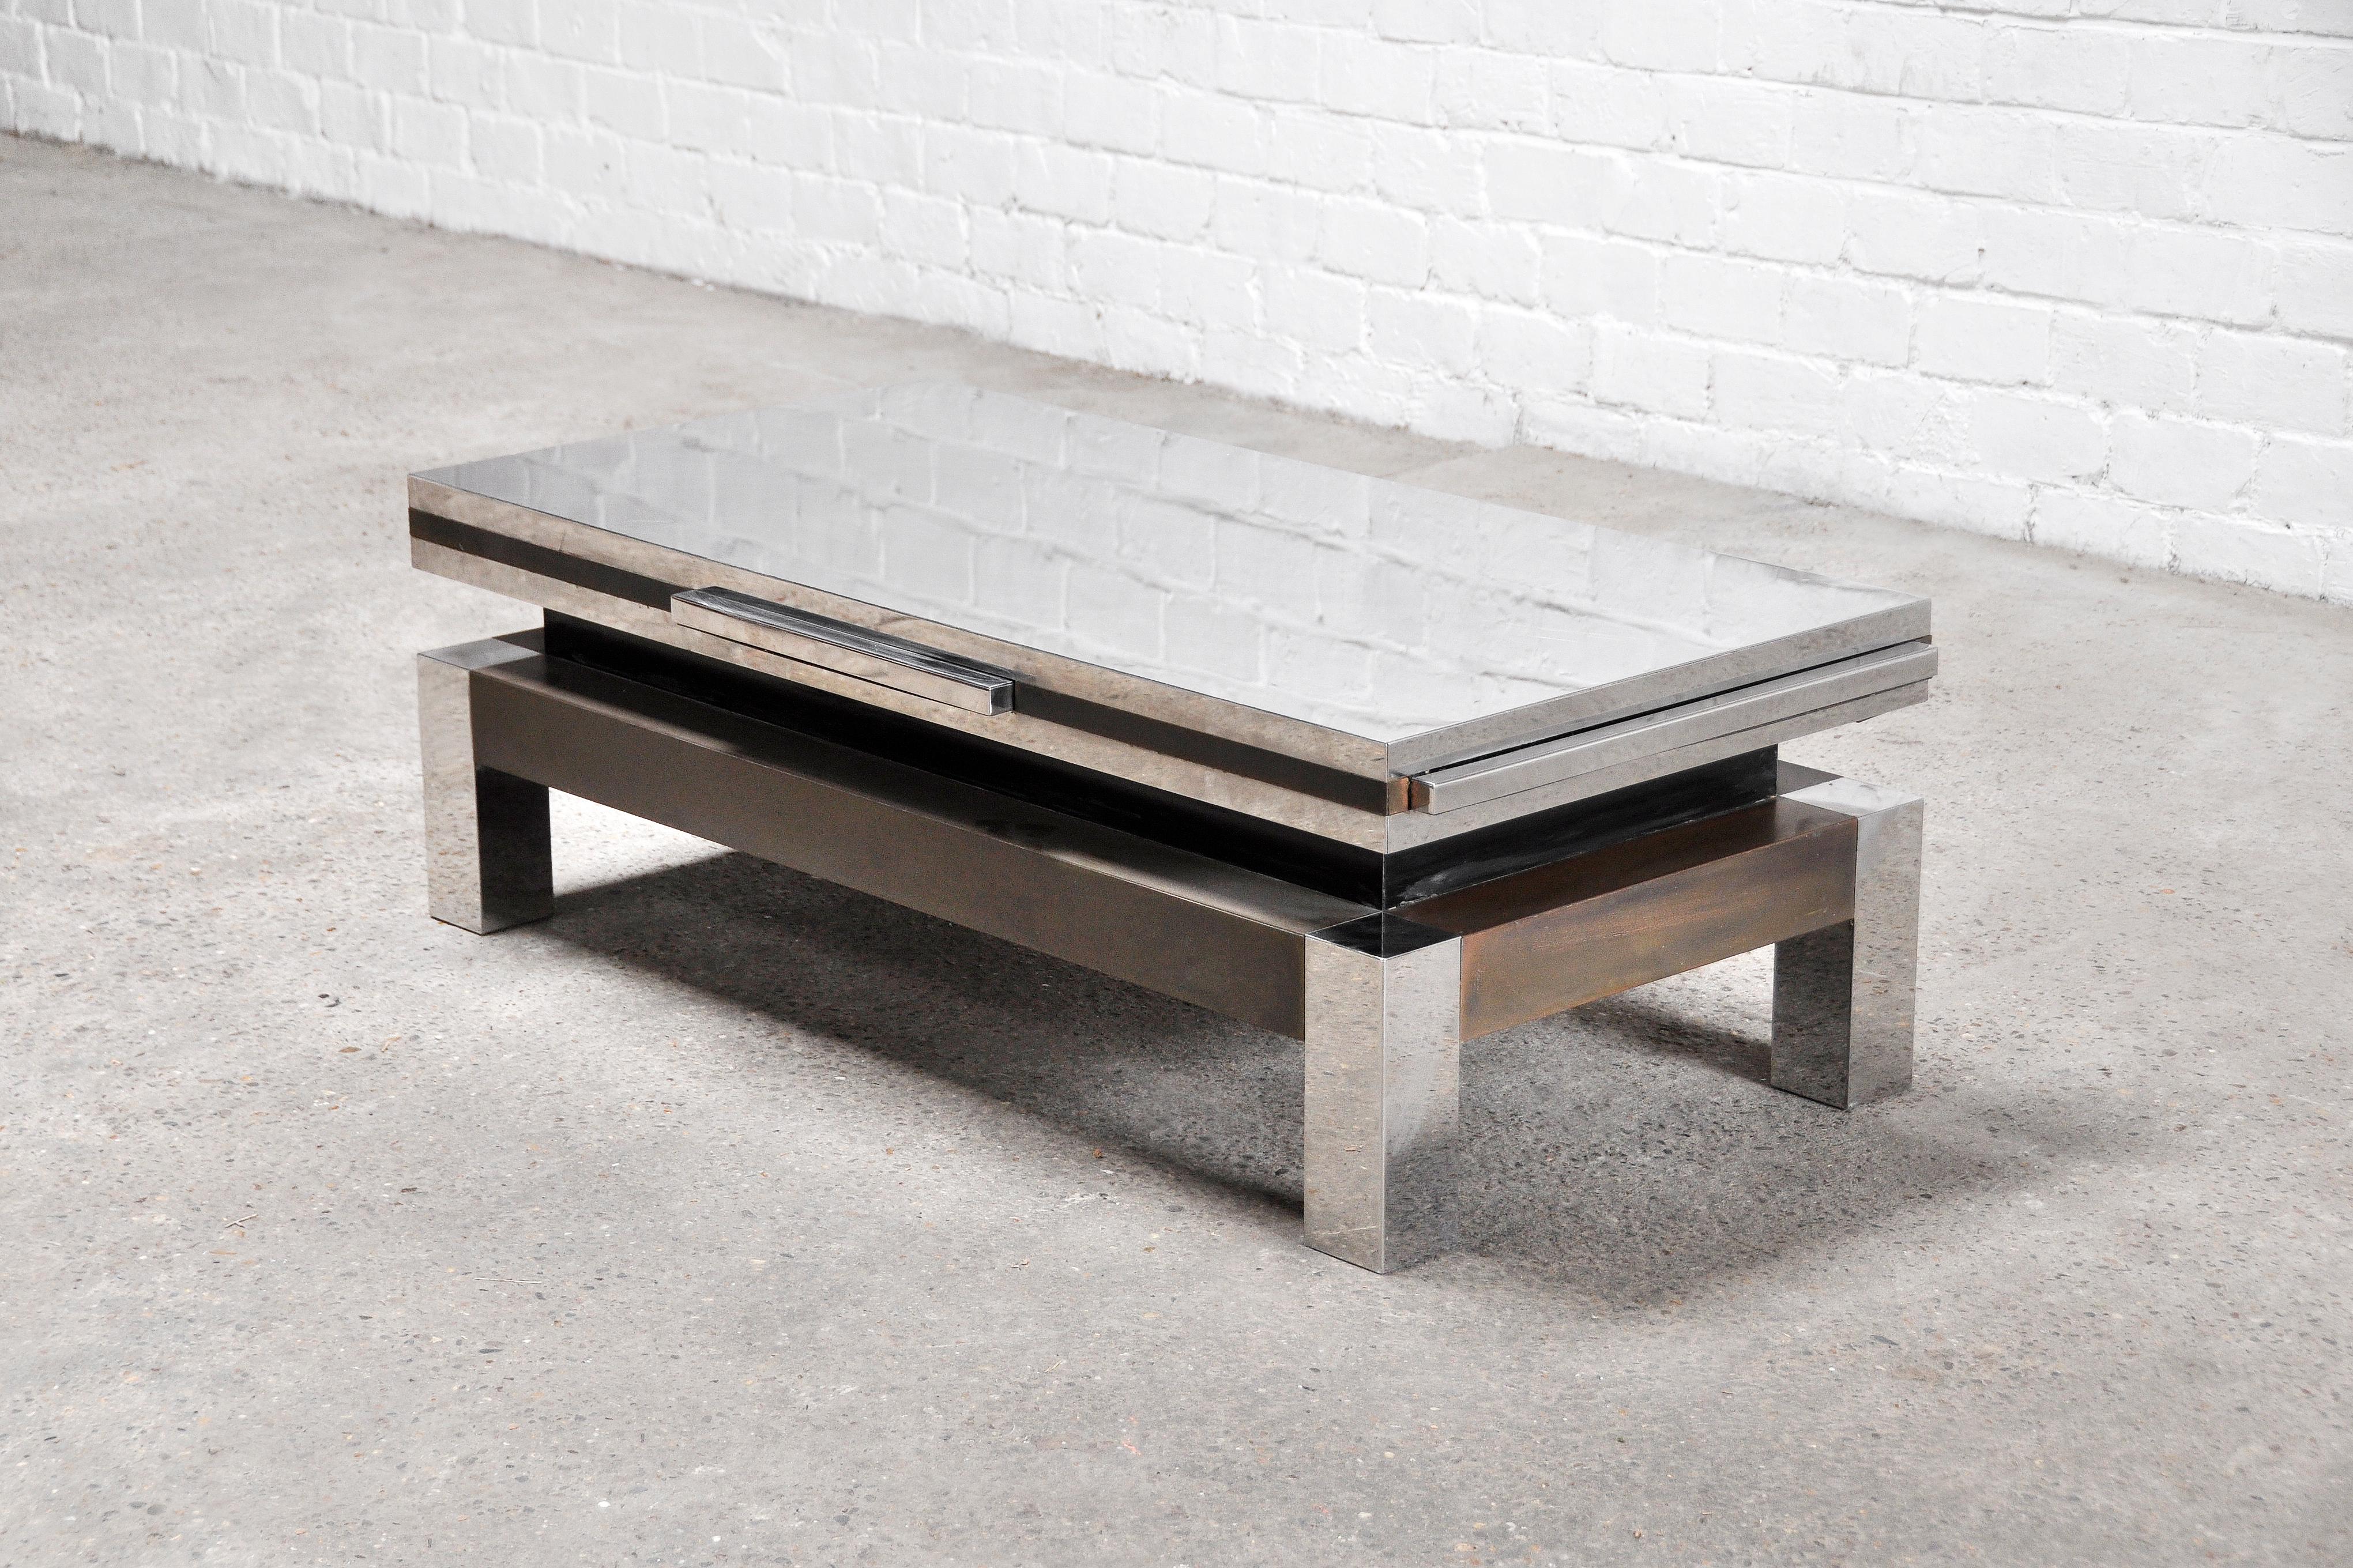 A unique and rarely seen extendable coffee table by Sando Petti, 1970's. Constructed out of chrome and brass, this table is a truly shiny conversation piece. Each side features a chrome pull out tablet that widens and lengthens the table by almost 2